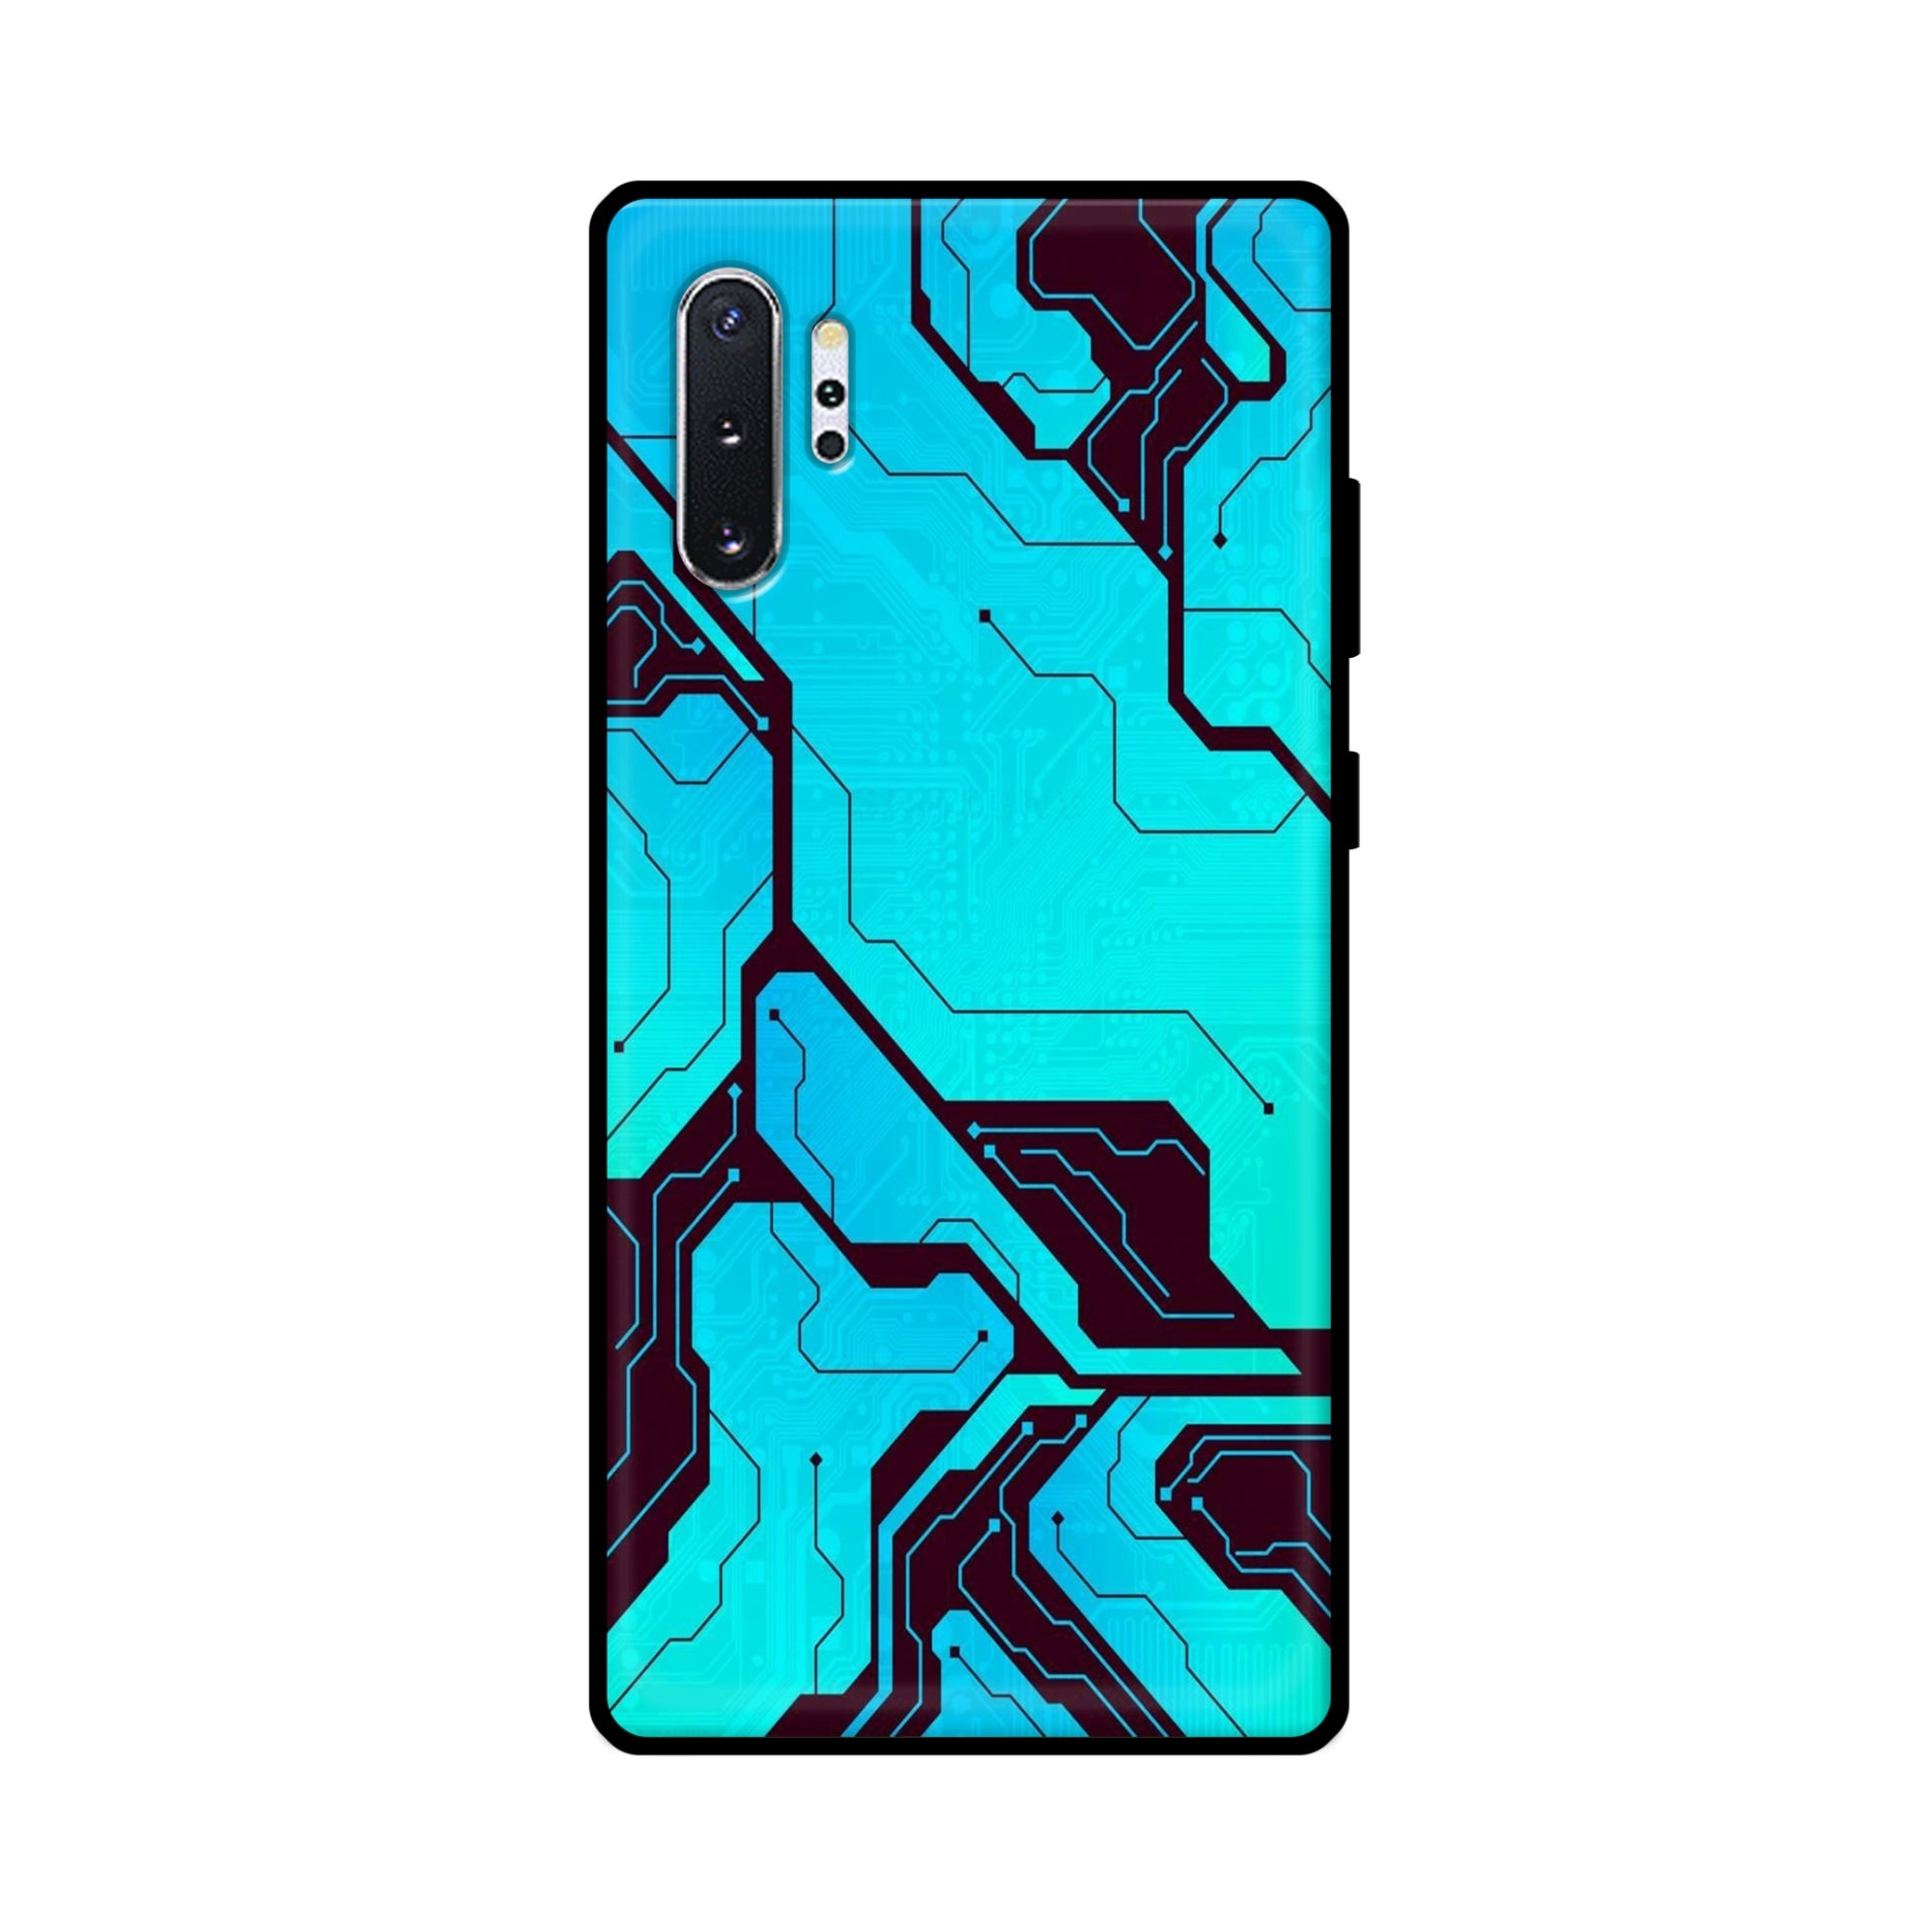 Buy Futuristic Line Metal-Silicon Back Mobile Phone Case/Cover For Samsung Note 10 Plus (5G) Online